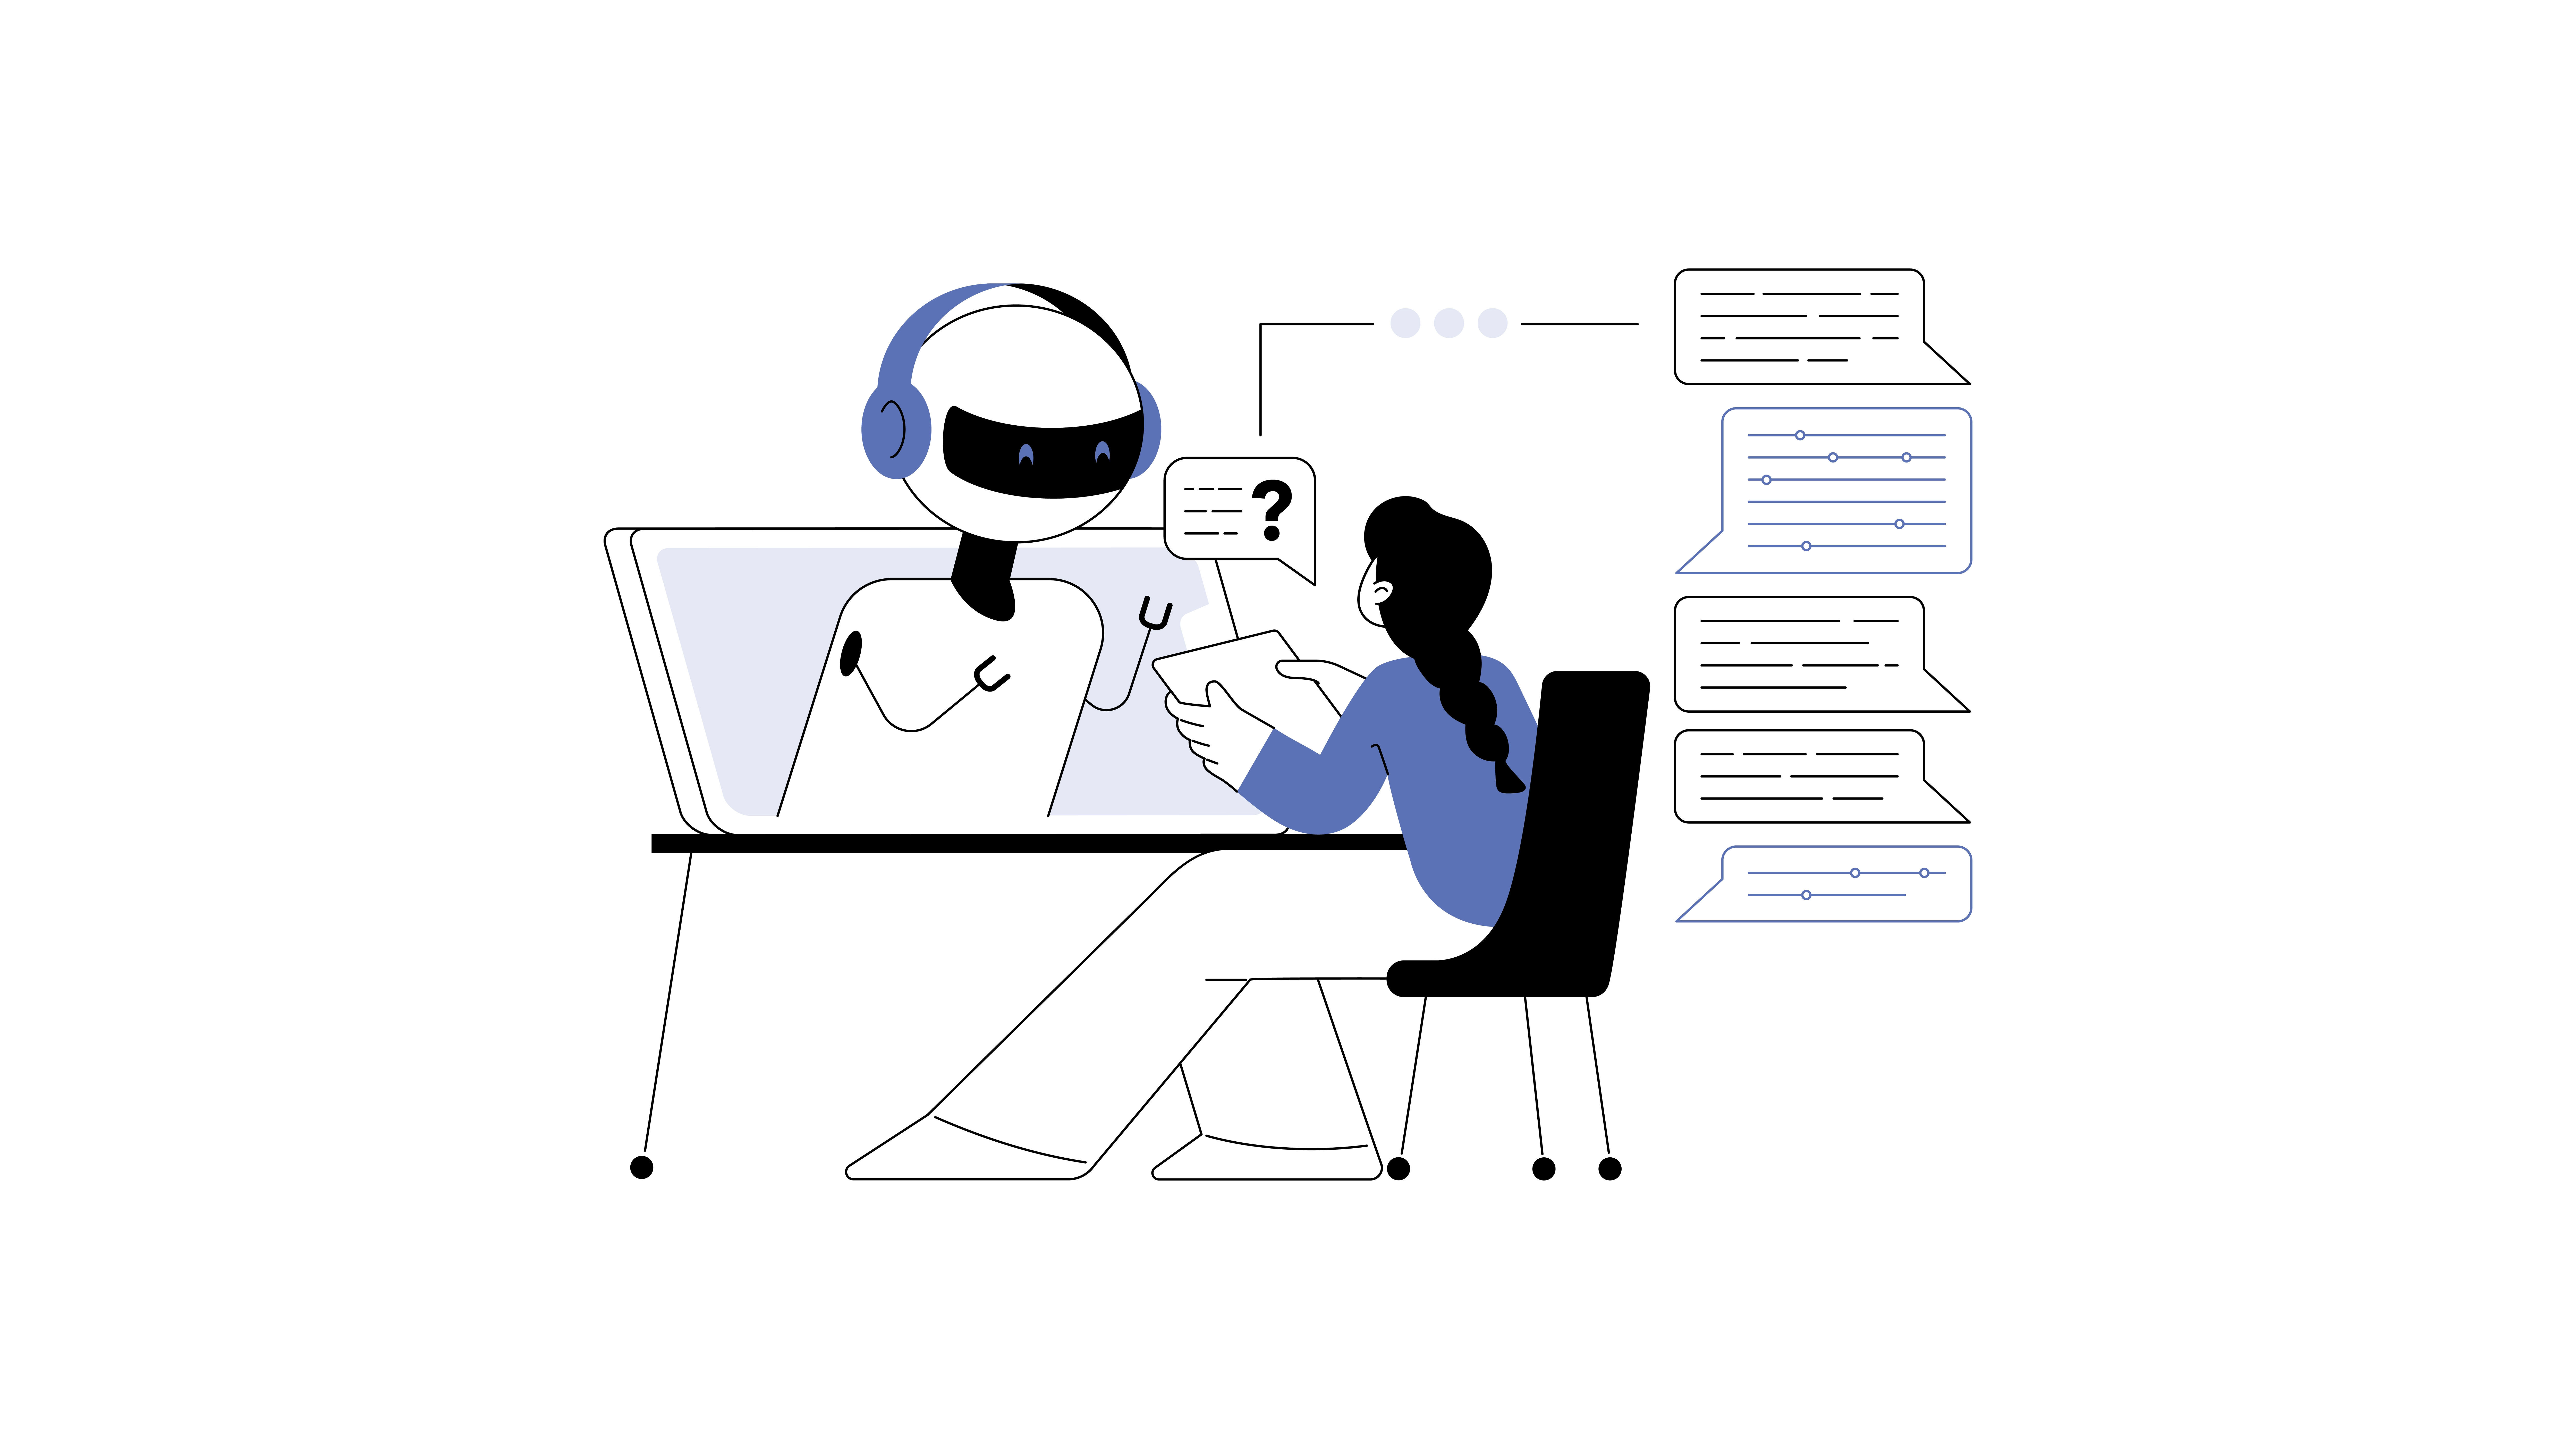 A cartoon image of a seated human flanked by several speech bubbles addressing a robot